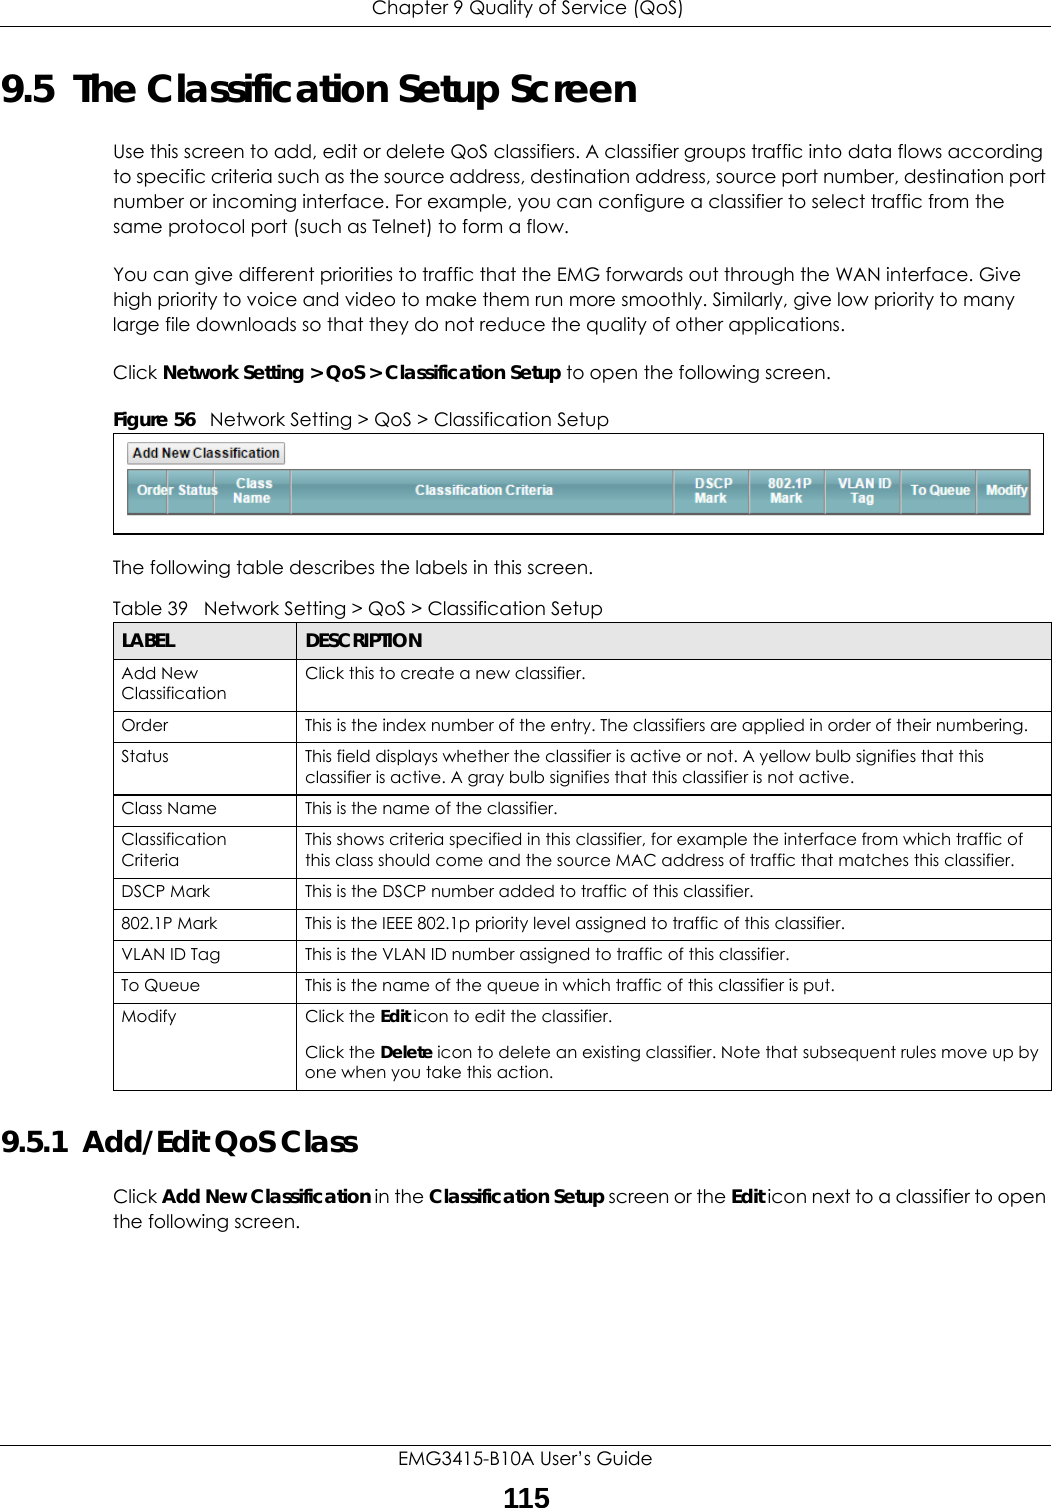  Chapter 9 Quality of Service (QoS)EMG3415-B10A User’s Guide1159.5  The Classification Setup Screen Use this screen to add, edit or delete QoS classifiers. A classifier groups traffic into data flows according to specific criteria such as the source address, destination address, source port number, destination port number or incoming interface. For example, you can configure a classifier to select traffic from the same protocol port (such as Telnet) to form a flow.You can give different priorities to traffic that the EMG forwards out through the WAN interface. Give high priority to voice and video to make them run more smoothly. Similarly, give low priority to many large file downloads so that they do not reduce the quality of other applications. Click Network Setting &gt; QoS &gt; Classification Setup to open the following screen.Figure 56   Network Setting &gt; QoS &gt; Classification Setup The following table describes the labels in this screen.  9.5.1  Add/Edit QoS Class Click Add New Classification in the Classification Setup screen or the Edit icon next to a classifier to open the following screen. Table 39   Network Setting &gt; QoS &gt; Classification SetupLABEL DESCRIPTIONAdd New ClassificationClick this to create a new classifier.Order This is the index number of the entry. The classifiers are applied in order of their numbering.Status This field displays whether the classifier is active or not. A yellow bulb signifies that this classifier is active. A gray bulb signifies that this classifier is not active.Class Name This is the name of the classifier.Classification CriteriaThis shows criteria specified in this classifier, for example the interface from which traffic of this class should come and the source MAC address of traffic that matches this classifier.DSCP Mark This is the DSCP number added to traffic of this classifier.802.1P Mark This is the IEEE 802.1p priority level assigned to traffic of this classifier.VLAN ID Tag This is the VLAN ID number assigned to traffic of this classifier.To Queue This is the name of the queue in which traffic of this classifier is put.Modify Click the Edit icon to edit the classifier.Click the Delete icon to delete an existing classifier. Note that subsequent rules move up by one when you take this action.